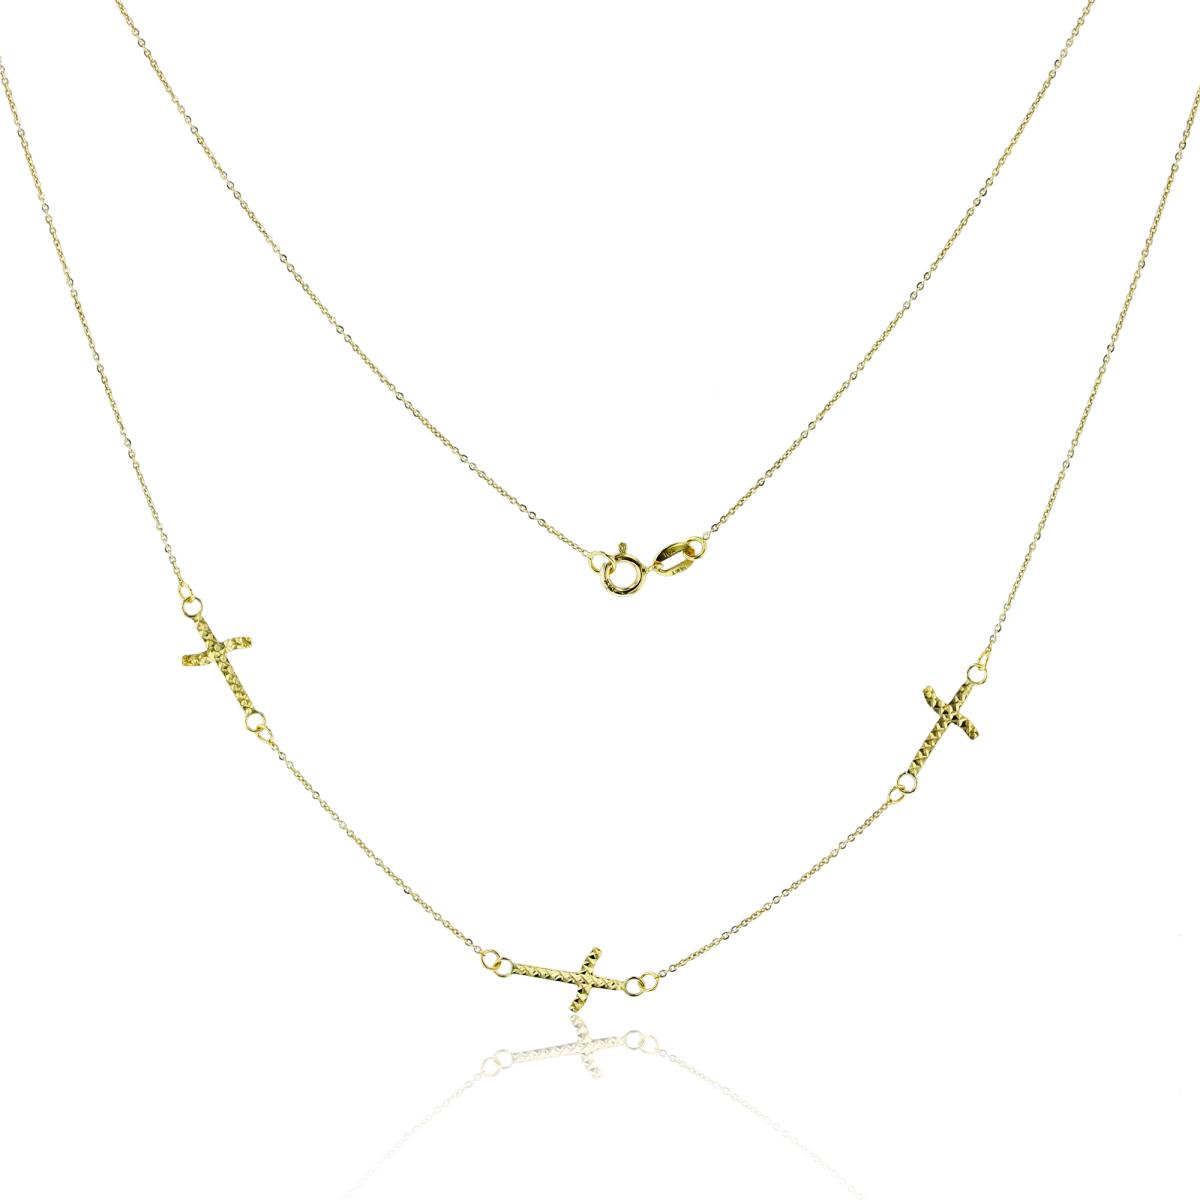 14K Yellow Gold Round Hammered Cable Chain with Triple Star DC Crosses 18" Necklace